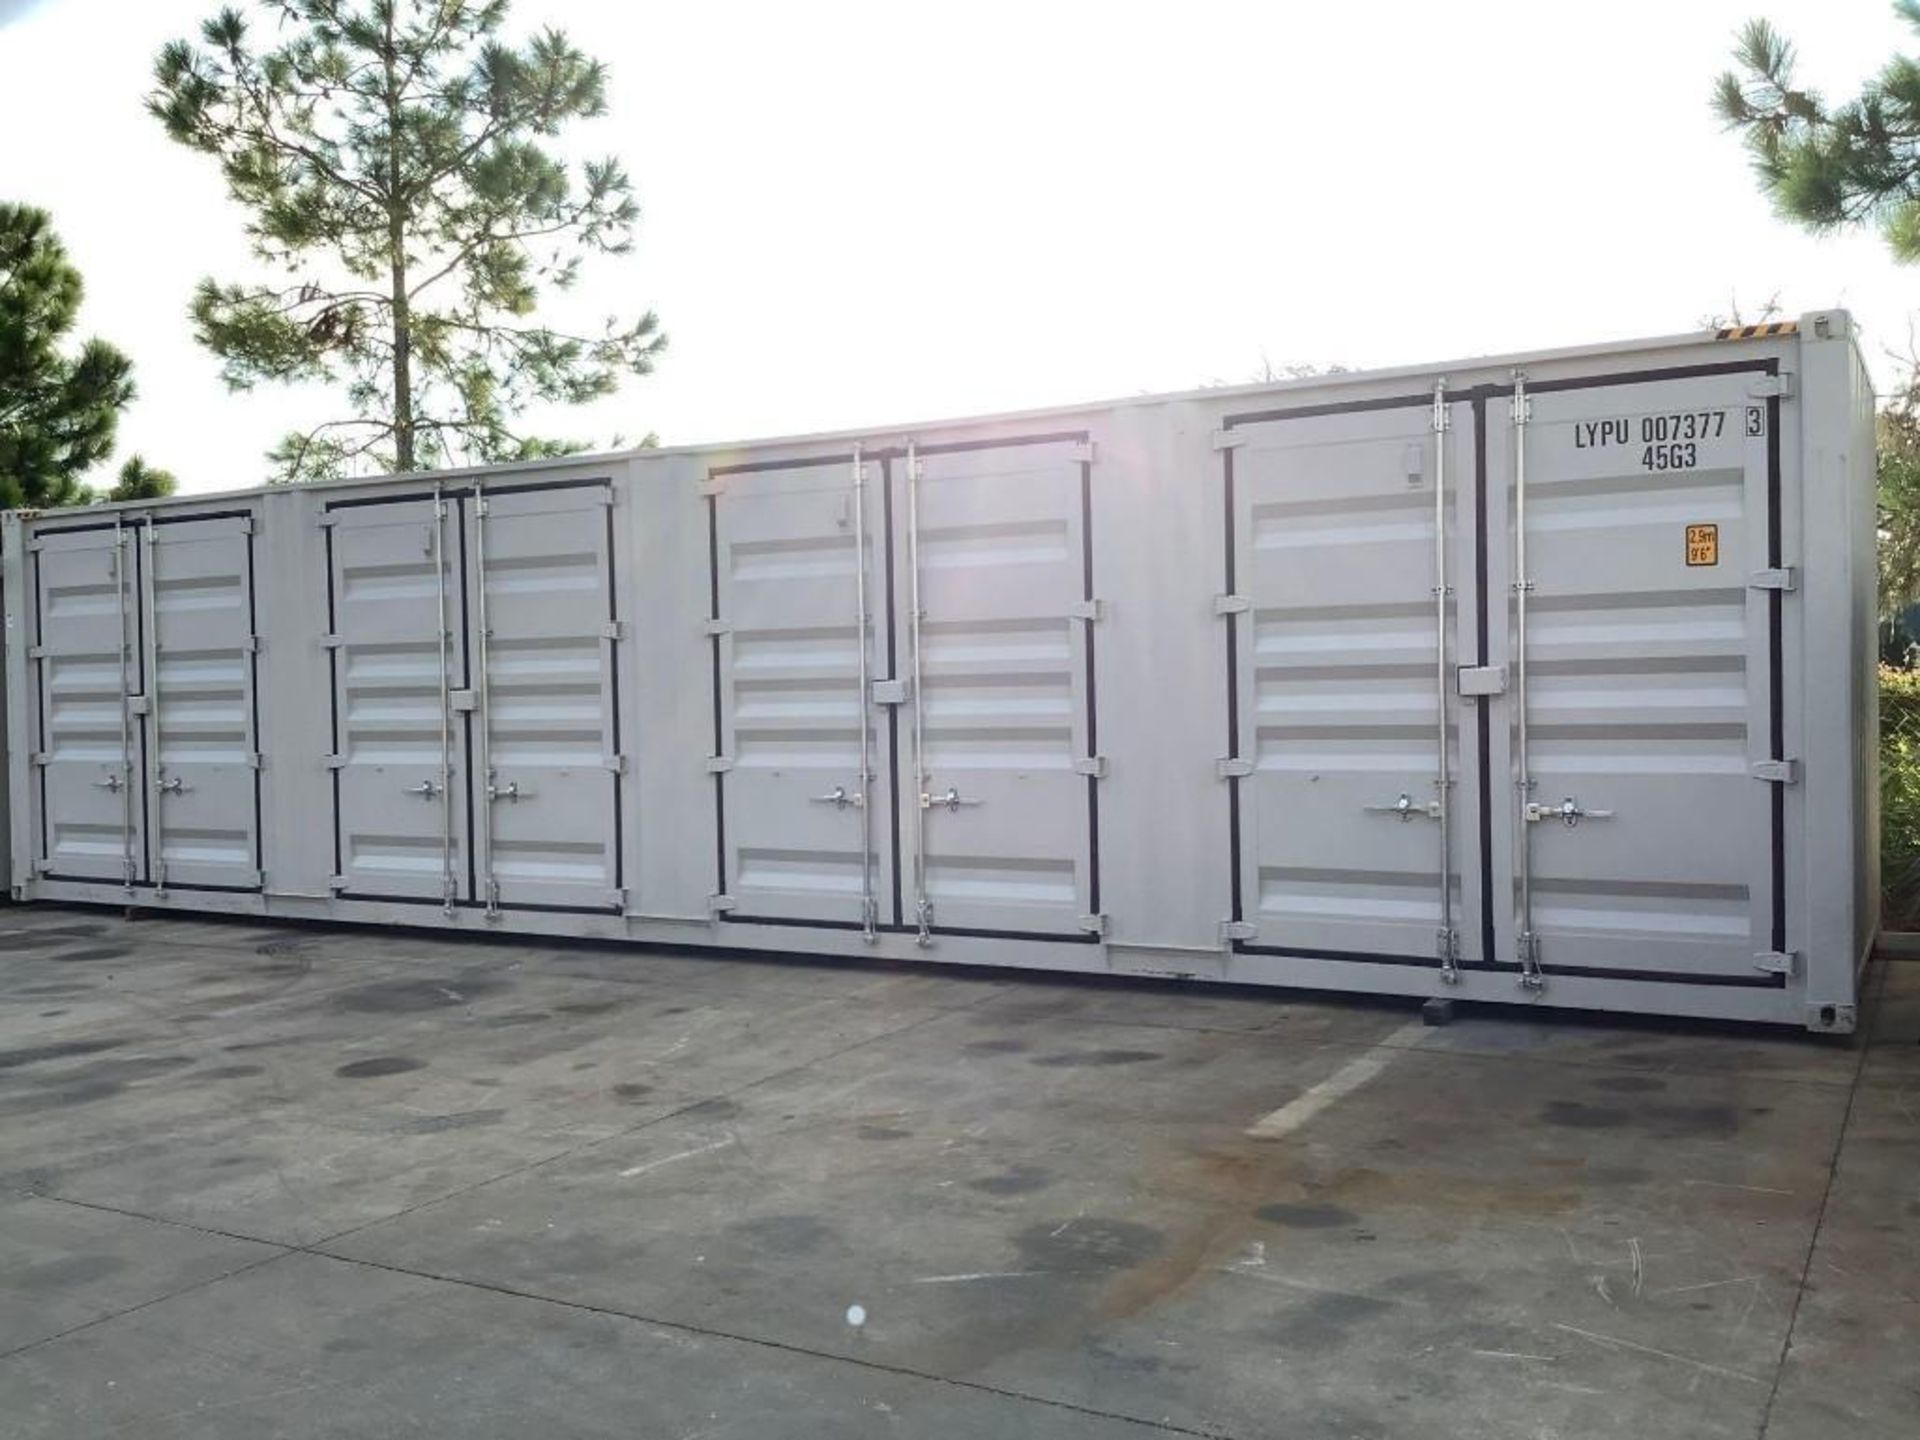 2022 40' STORAGE CONTAINER, APPROX 102" TALL x  96" WIDE x 40' DEEP - Image 3 of 8